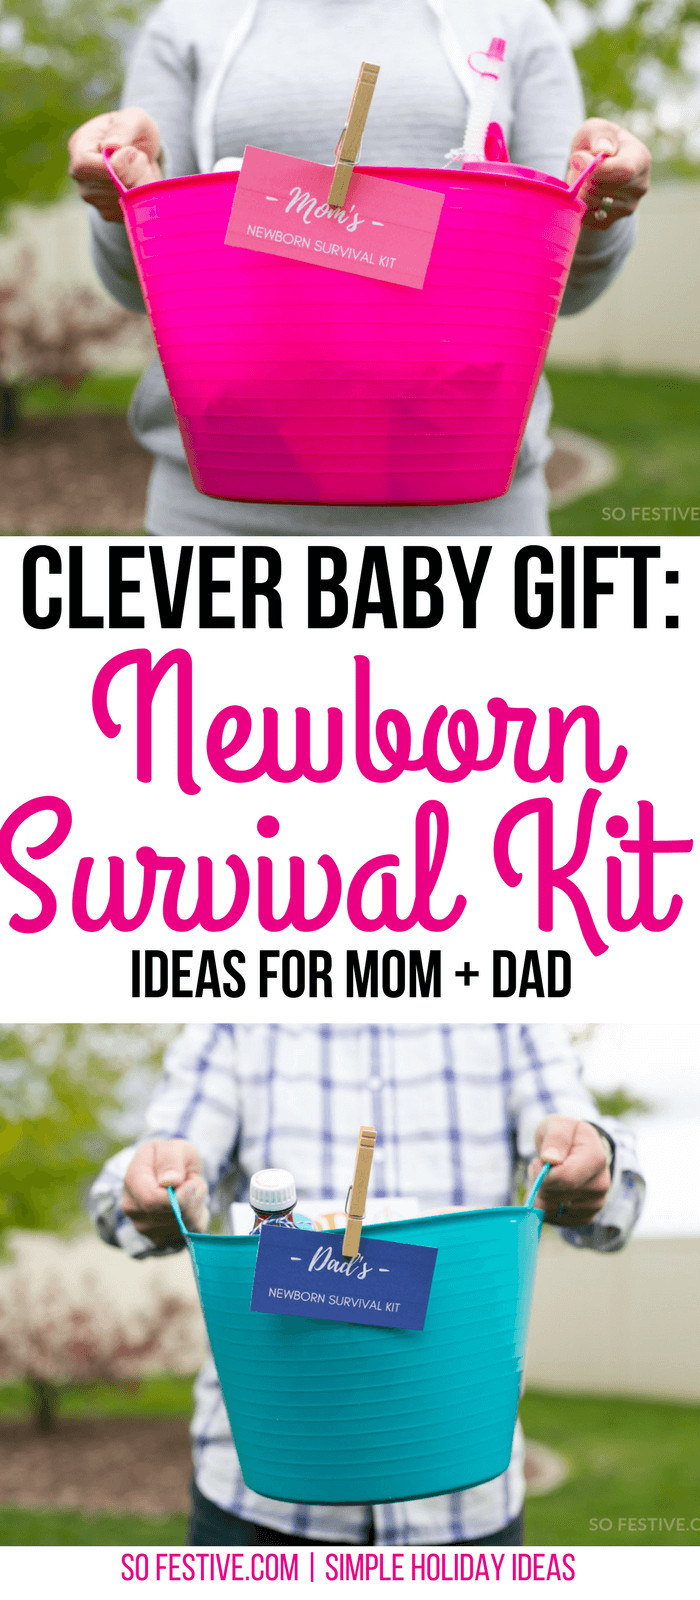 Baby Shower Gifts For Parents
 Newborn Survival Kit Baby Gift For Parents So Festive